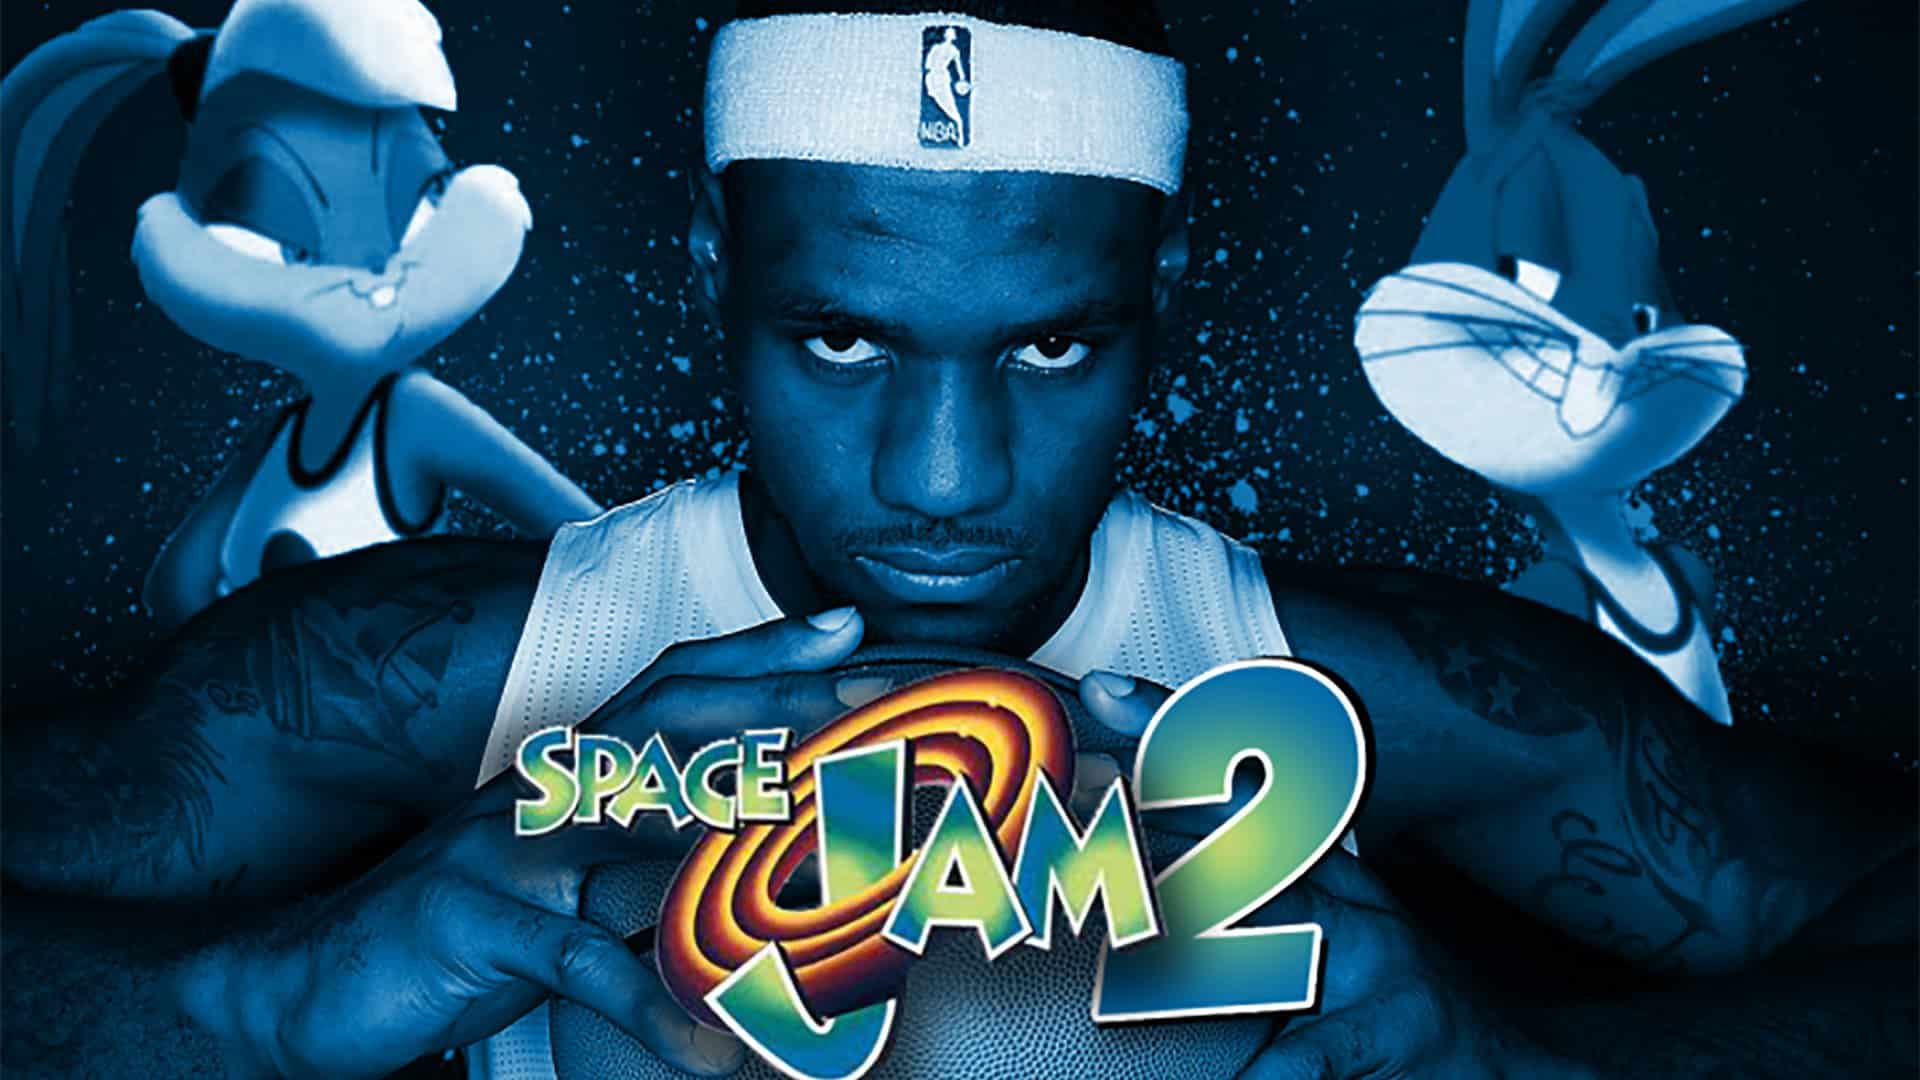 Free download LeBron James to officially star in Space Jam 2 Video [1920x1080] for your Desktop, Mobile & Tablet. Explore Space Jam 2 Wallpaper. Space Jam 2 Wallpaper, Space Jam Wallpaper, Space Jam Wallpaper